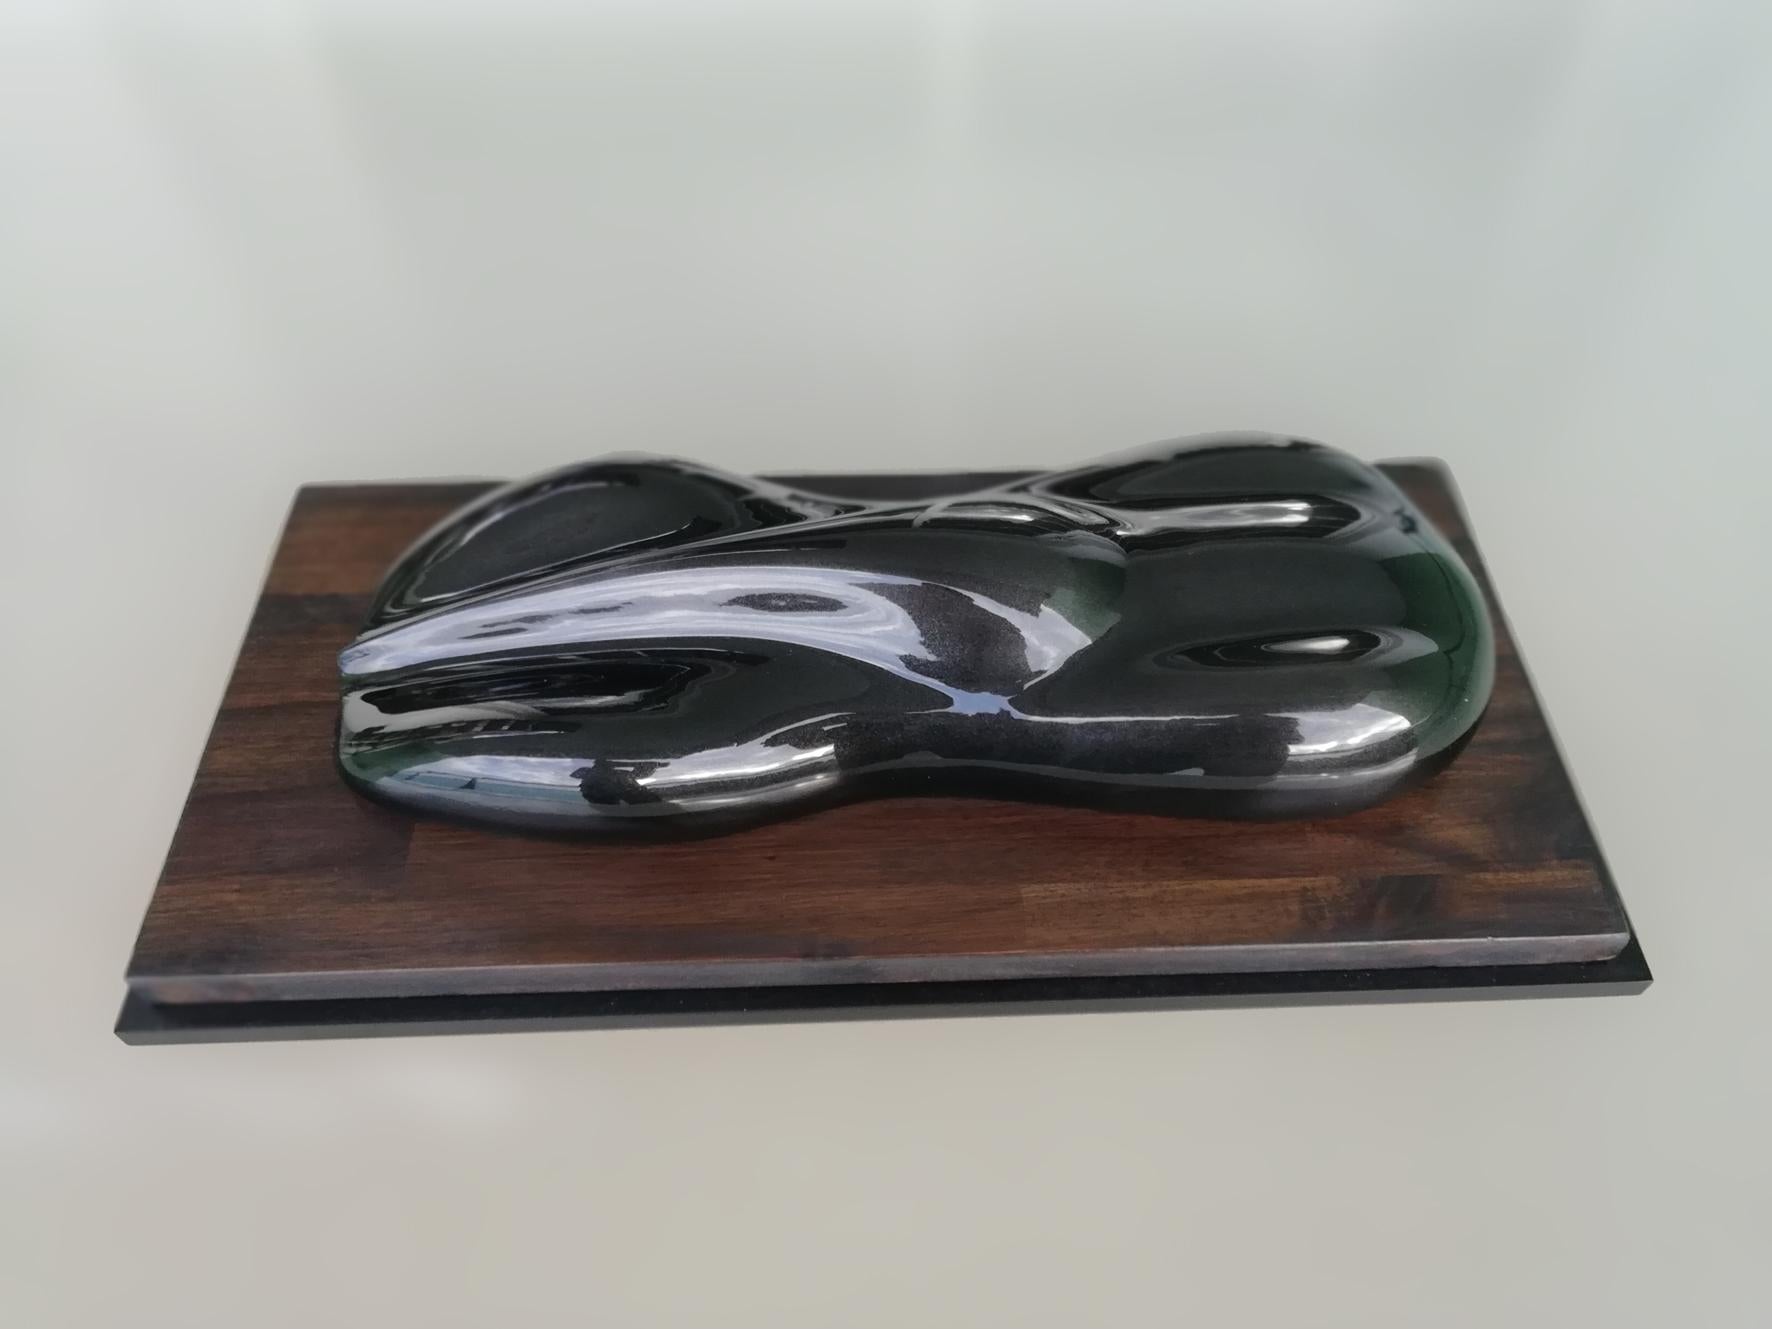 A dark green lacquered and varnished plaster model of a racing car.
On a lacquered rectangular wood base.

Belzoni finds inspiration in the legendary racing cars of the 1950s and the 1960s.
His elegant sculptures epitomize the spirit of a